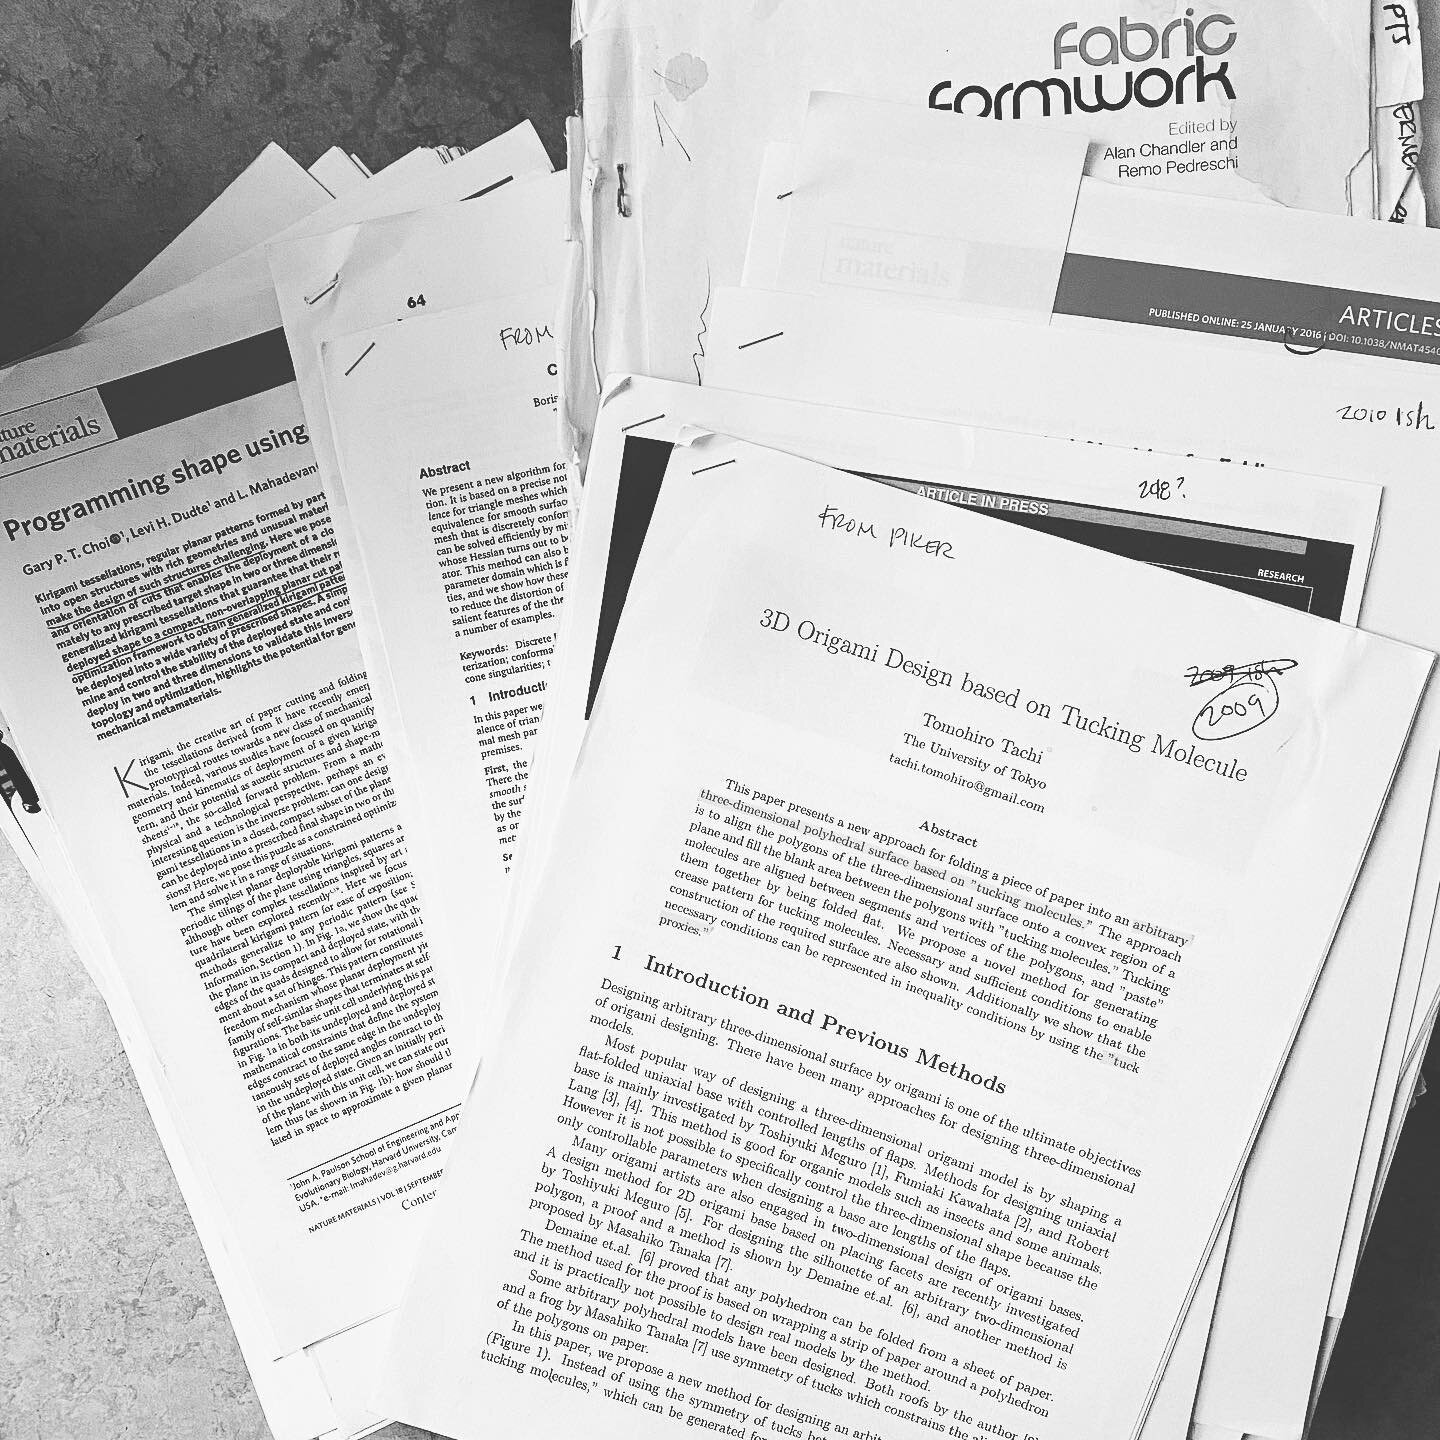 Recycling day. Man I read a lot of papers over the last 5 years😆
.
.
.
#phd #papers #research #itsdone #doclocke